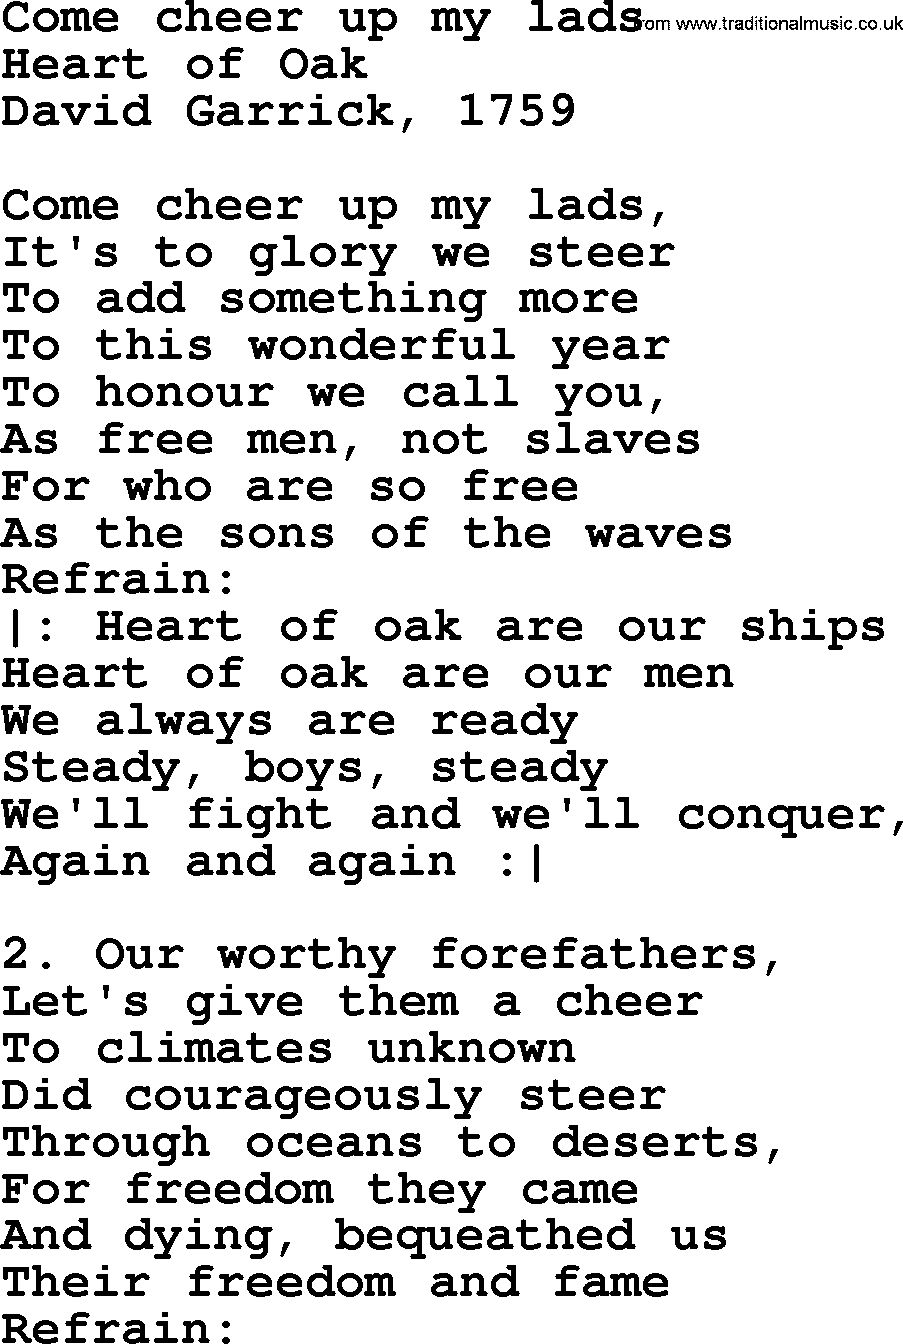 Sea Song or Shantie: Come Cheer Up My Lads, lyrics